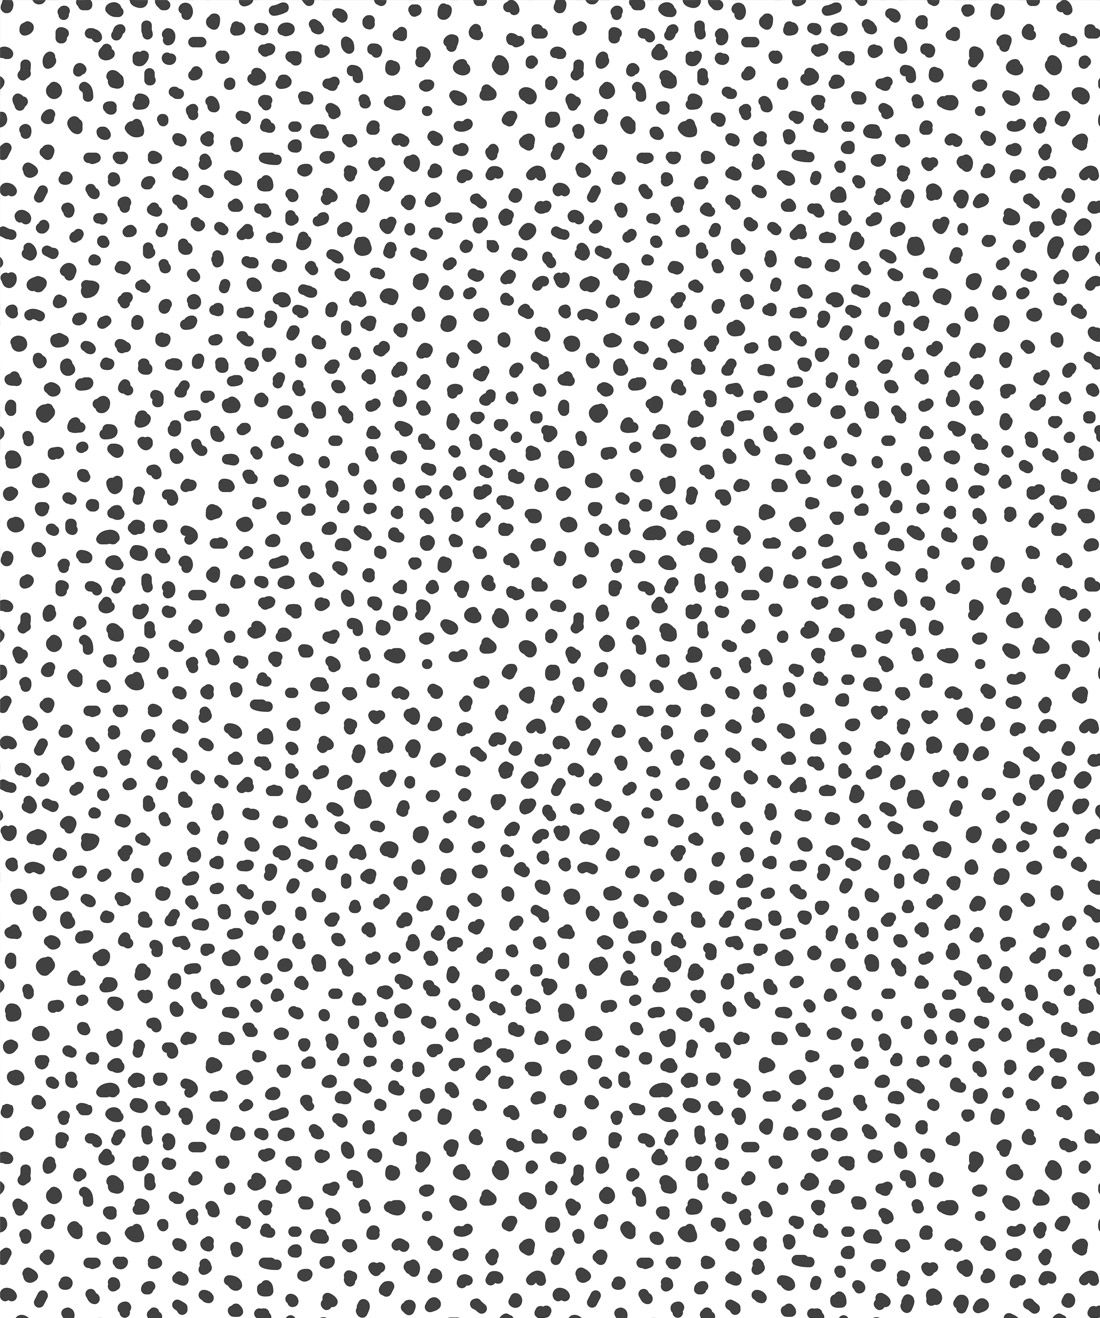 Huddy's Dots • Luxurious Spotted Wallpaper • Milton & King